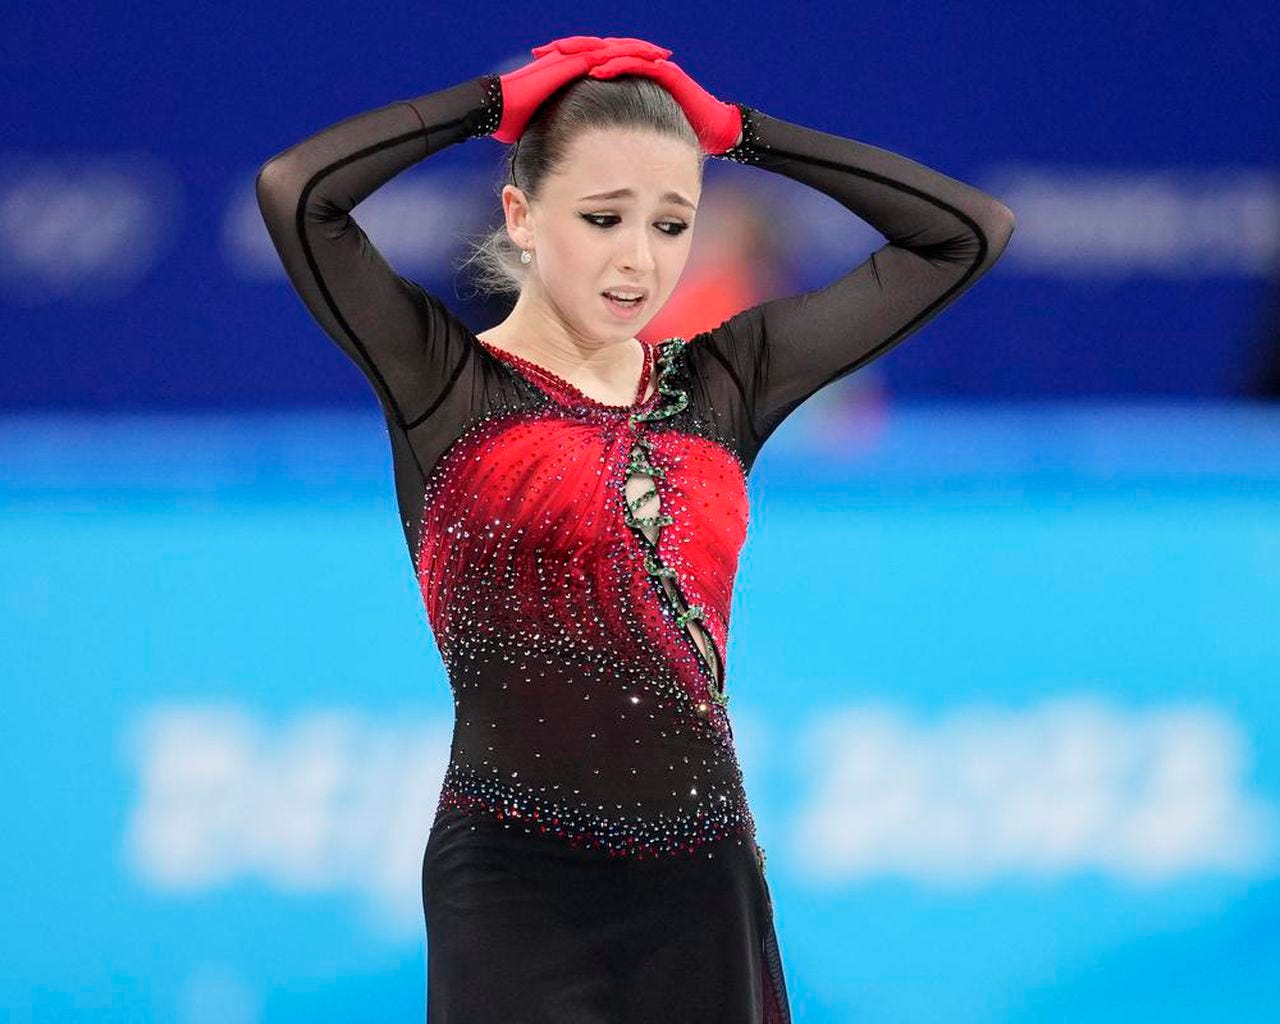 Olympic figure skating's issues run much deeper than the Valieva scandal, by The Spectator